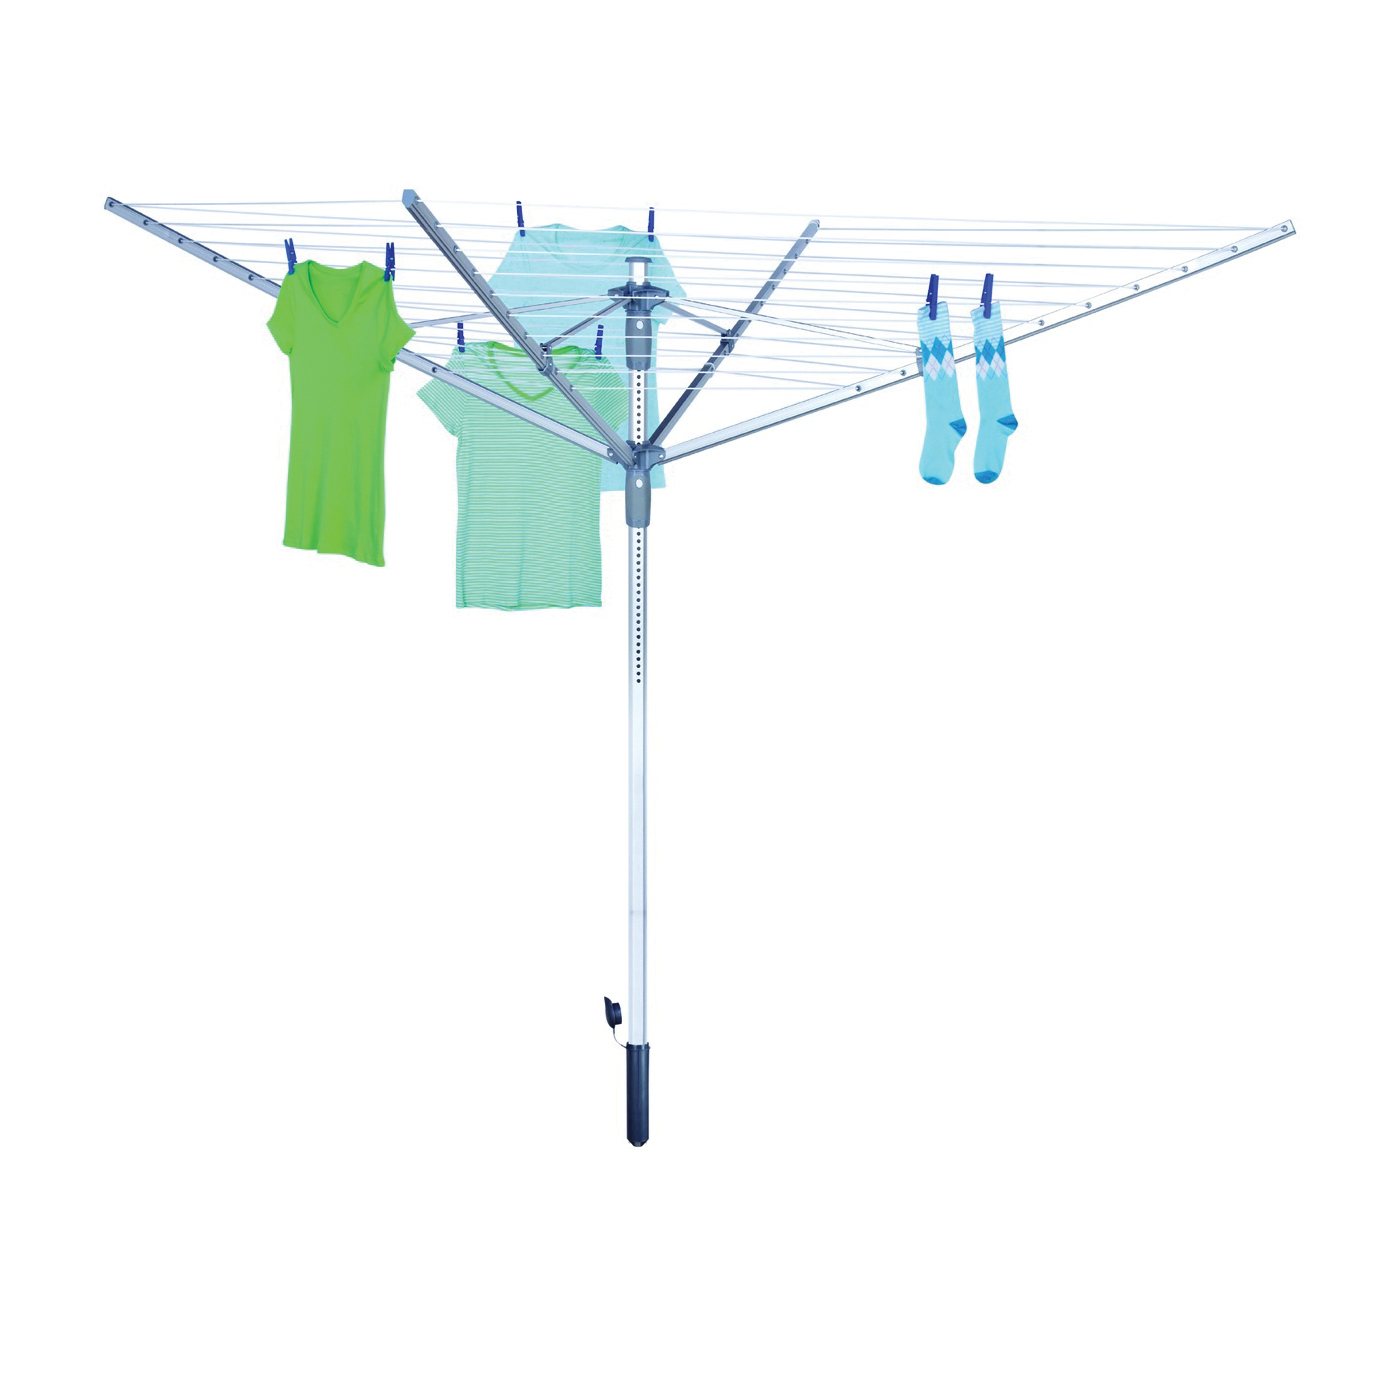 Honey-Can-Do DRY-04252 Umbrella Clothes Dryer, 78 in L, Aluminum, Silver